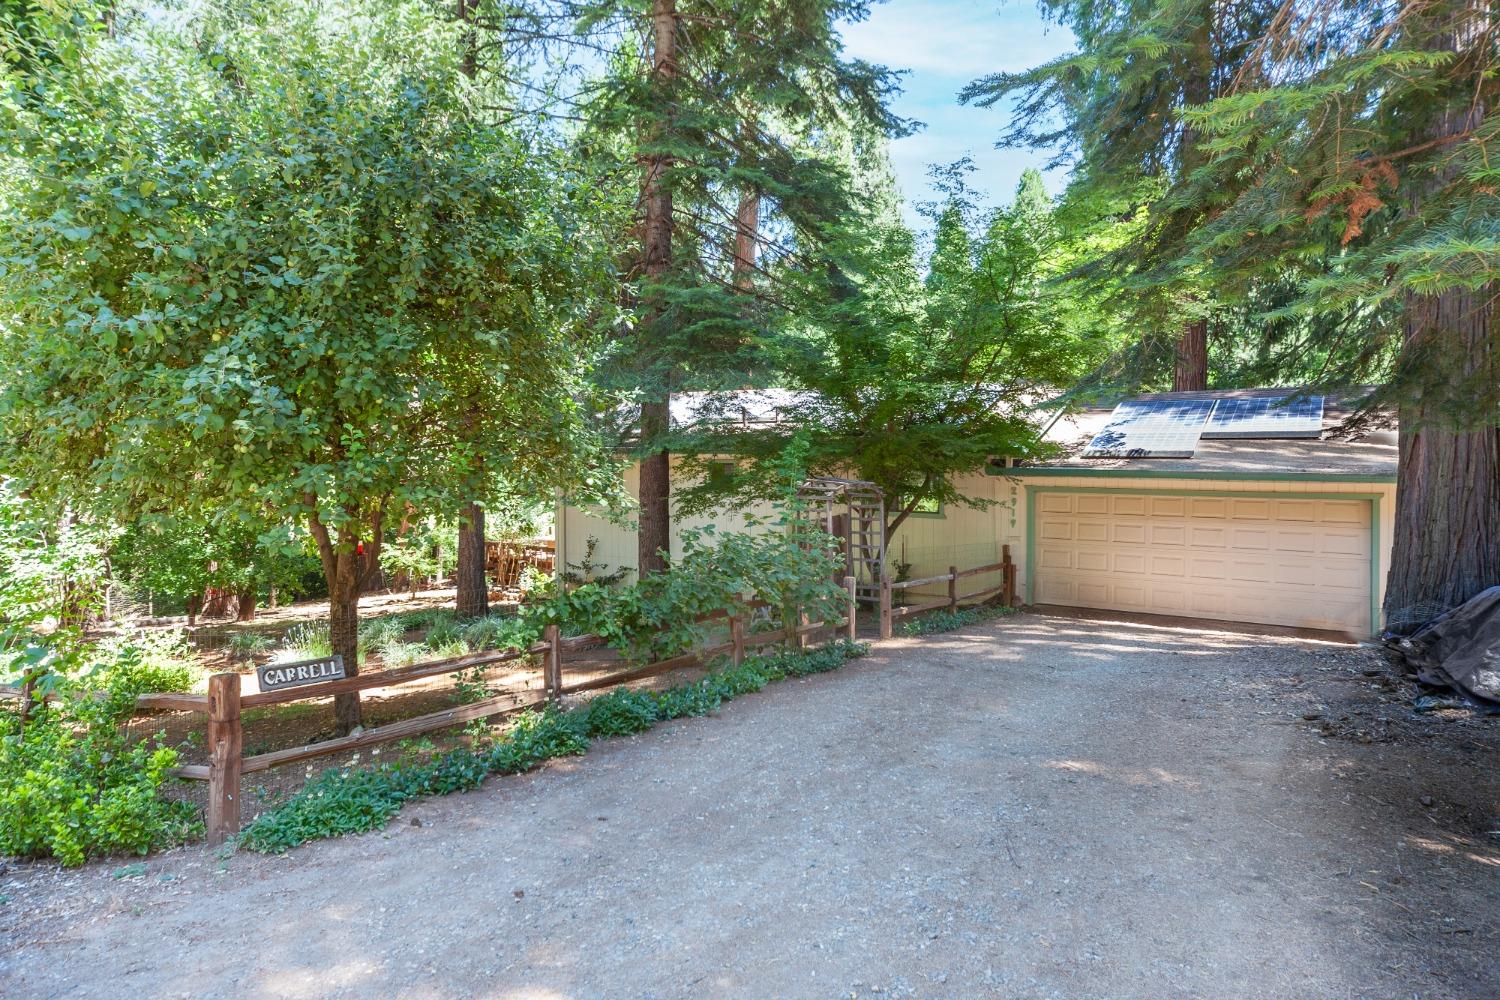 Photo of 2919 Piazza Ct in Pollock Pines, CA